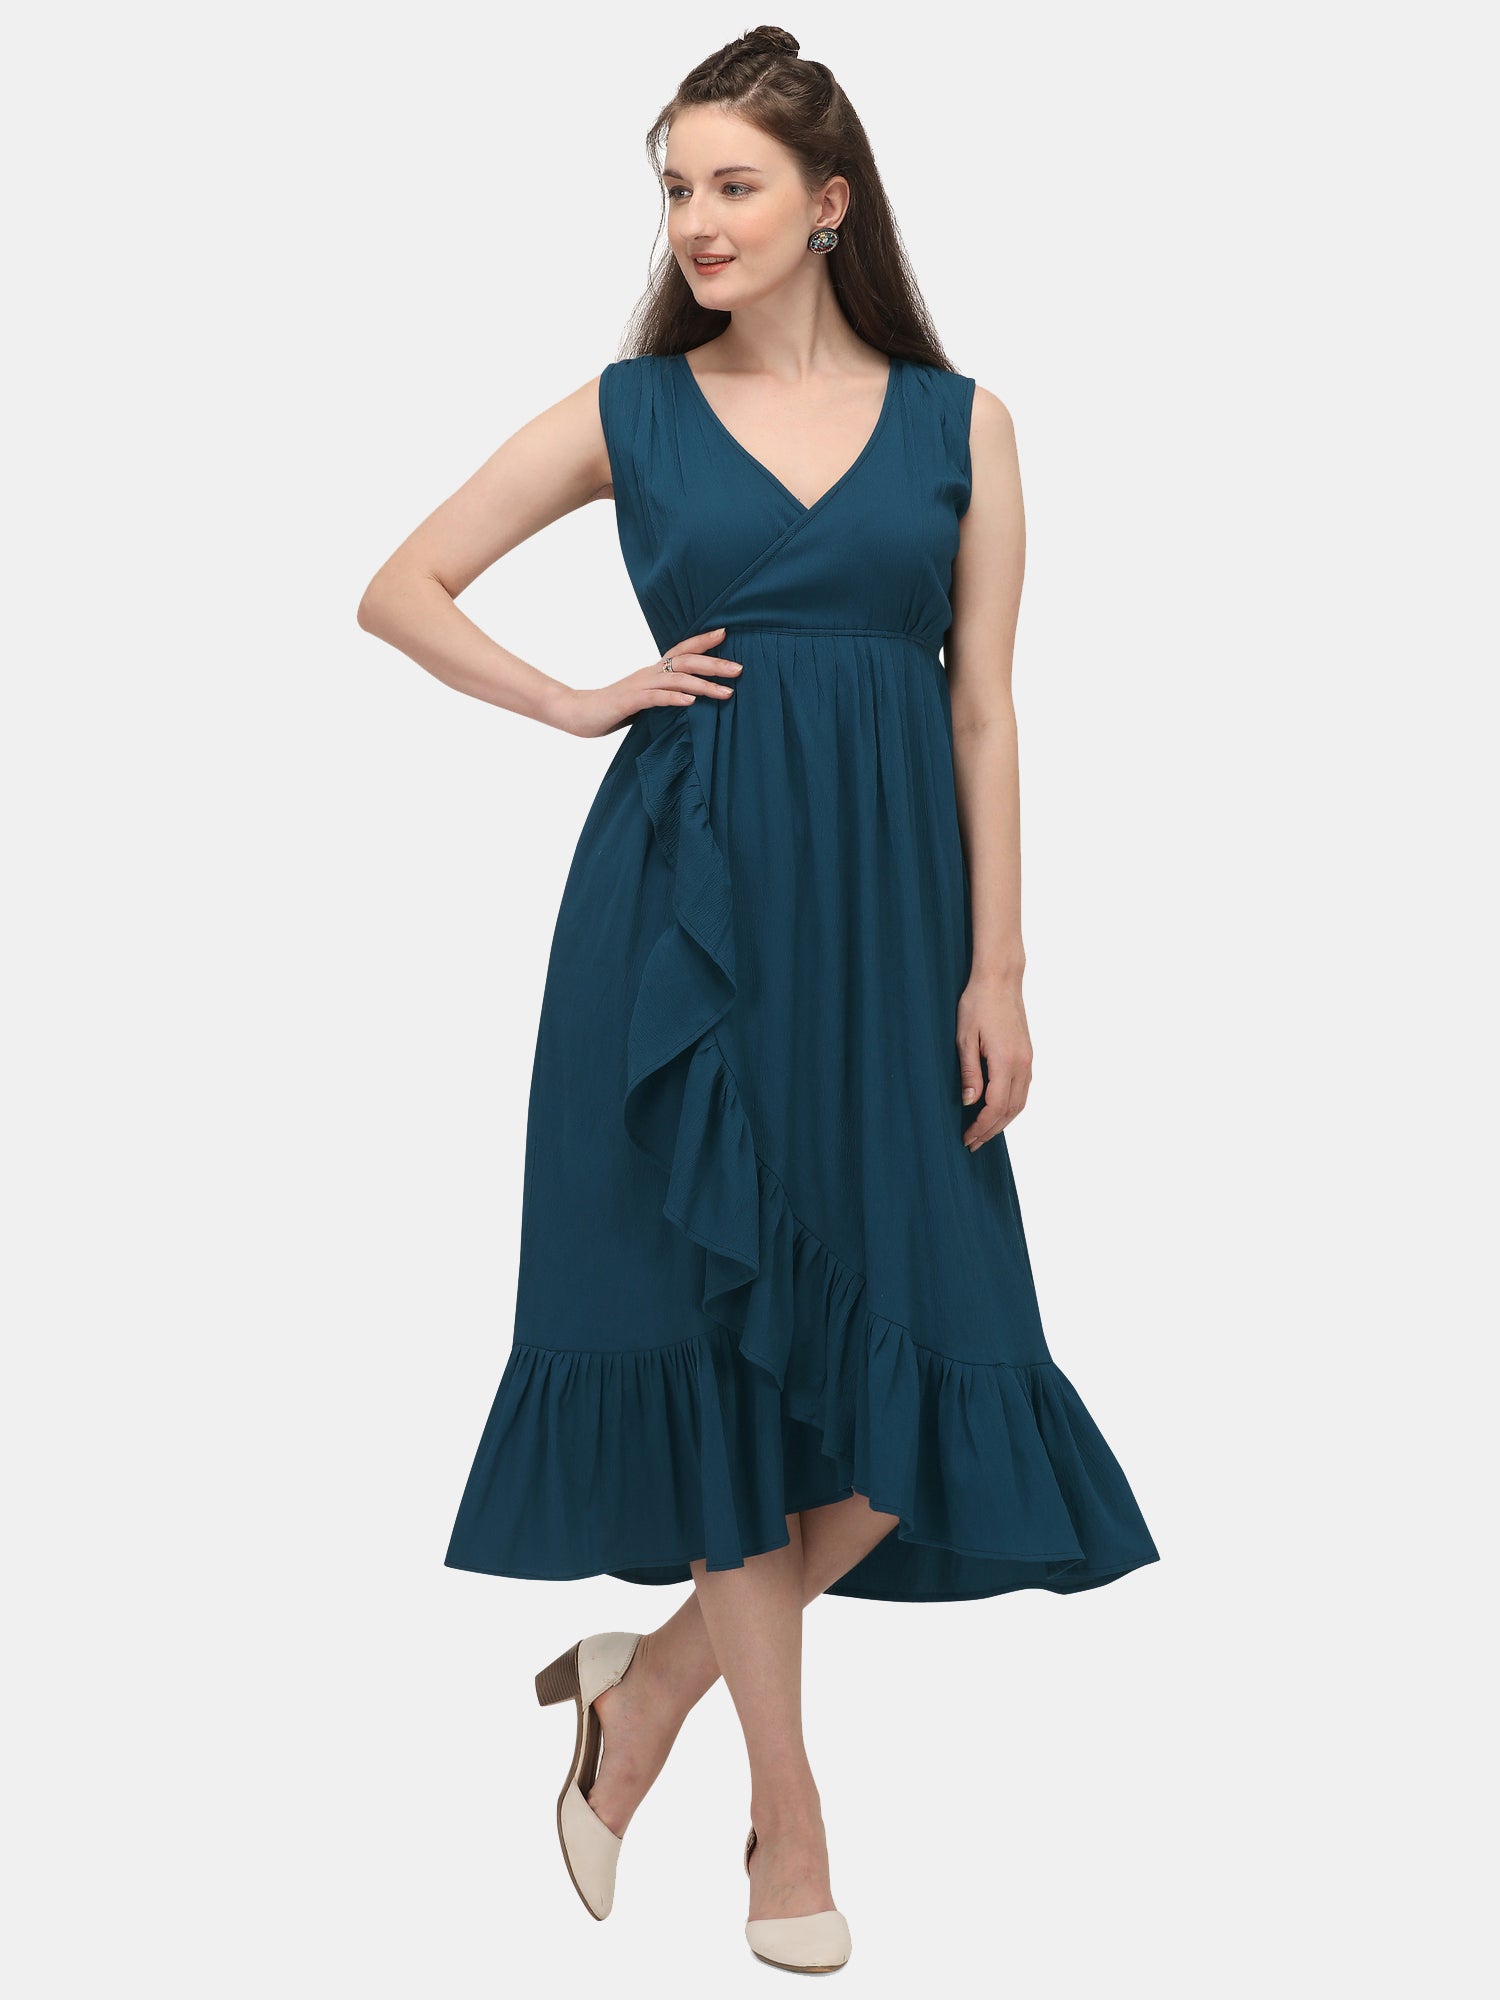 Women's Turquoise Long Ankle Length Frill Dress - MESMORA FASHIONS